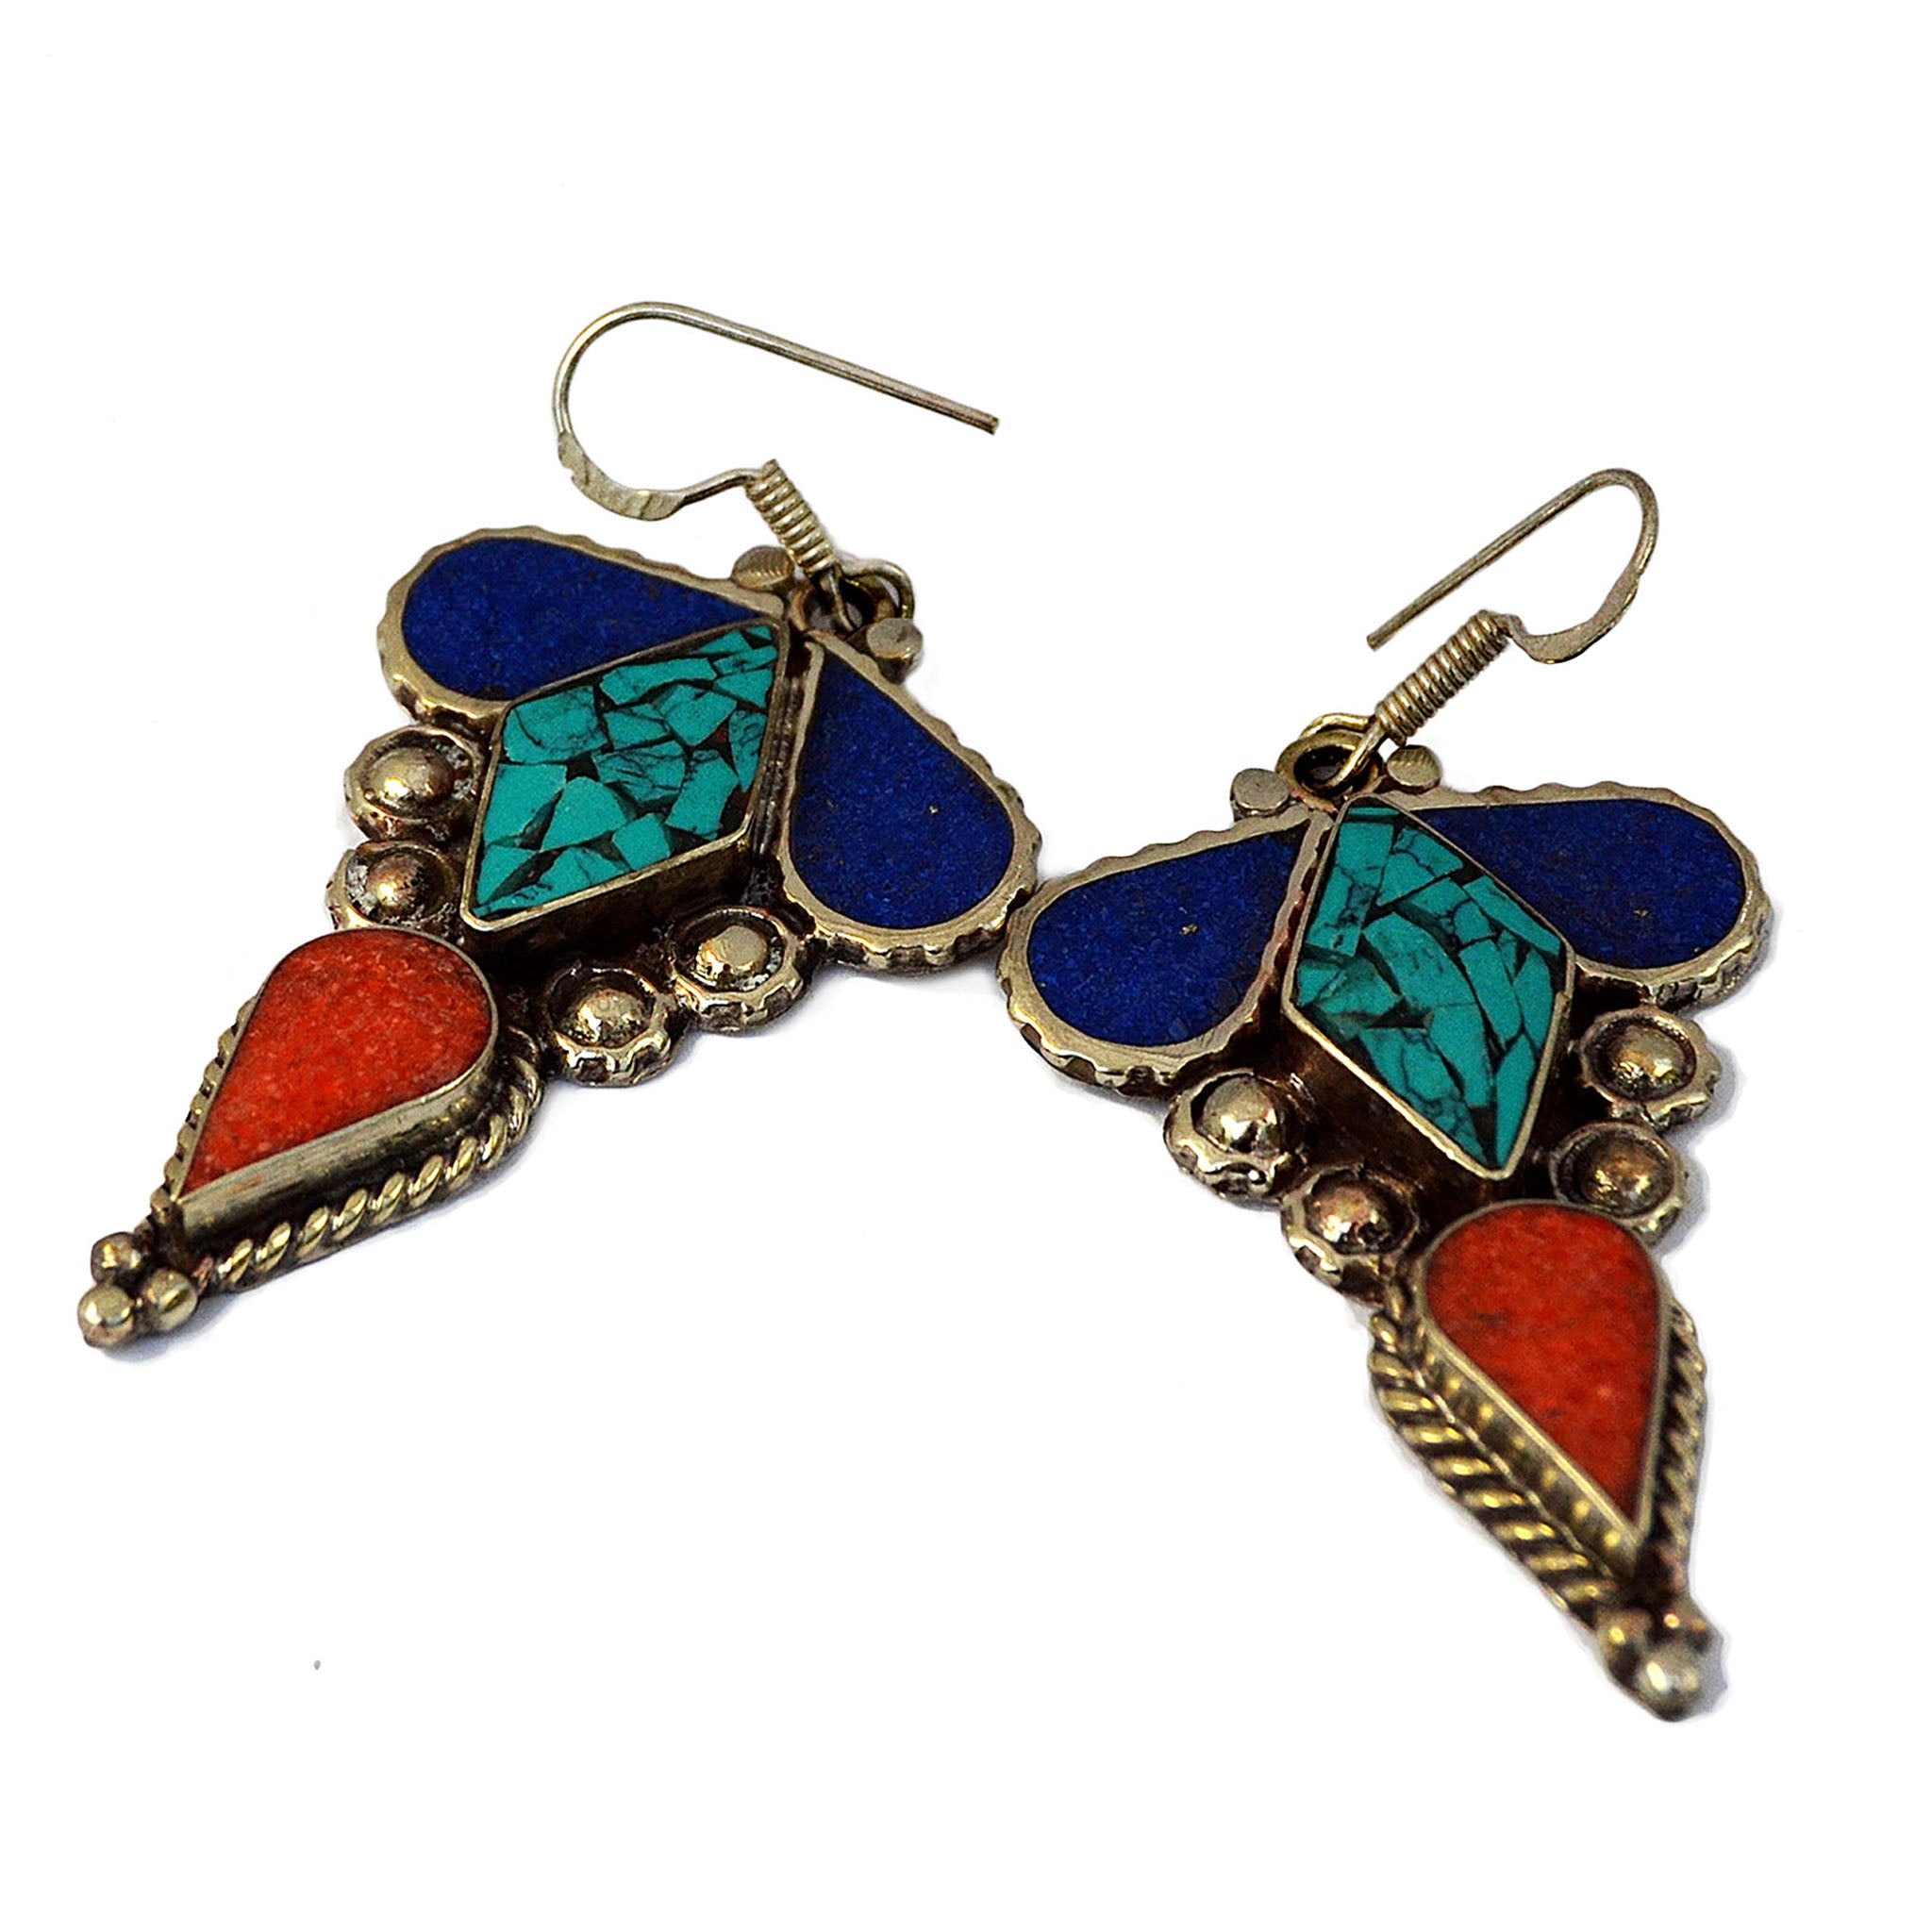 Ethnic silver hanging earrings with inlay turquoise, lapis lazuli and red coral gemstones